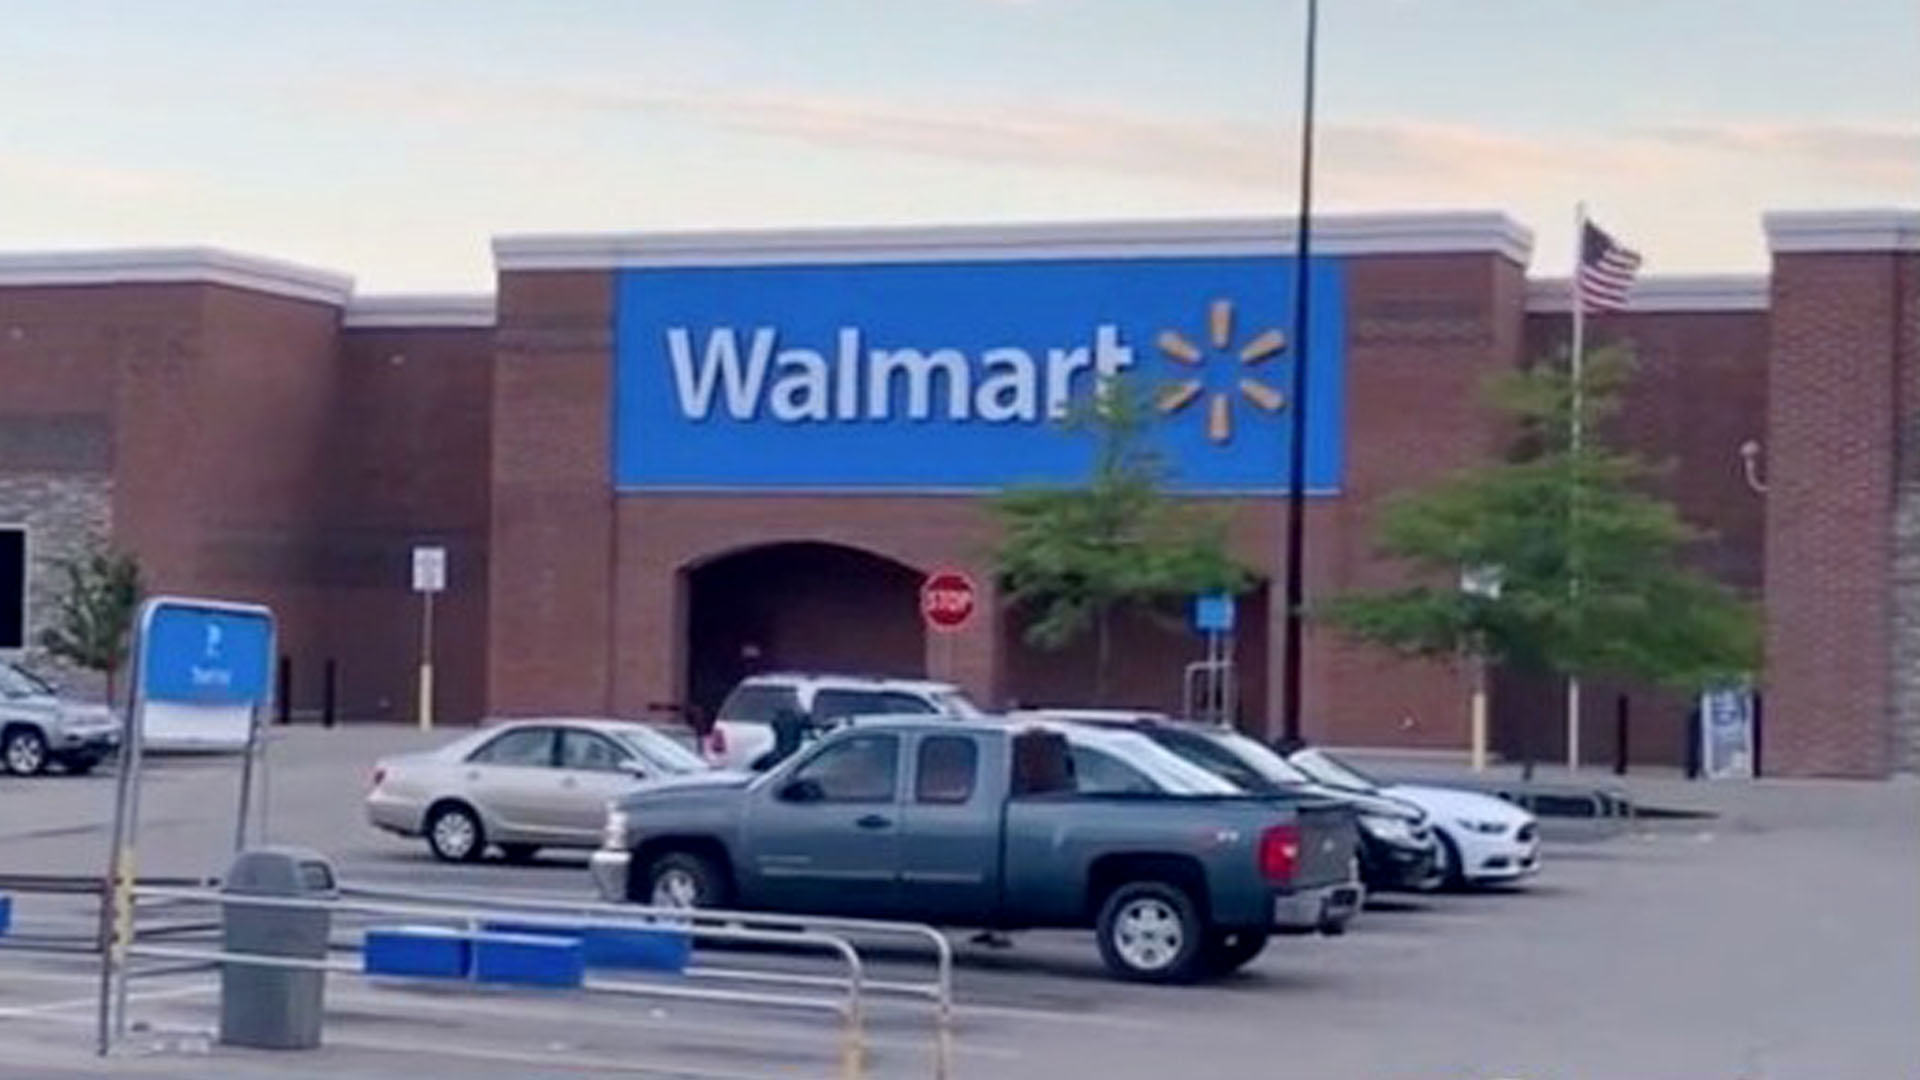 Walmart policy changes spark fury from customers after they say that it feels like they’ve been accused.